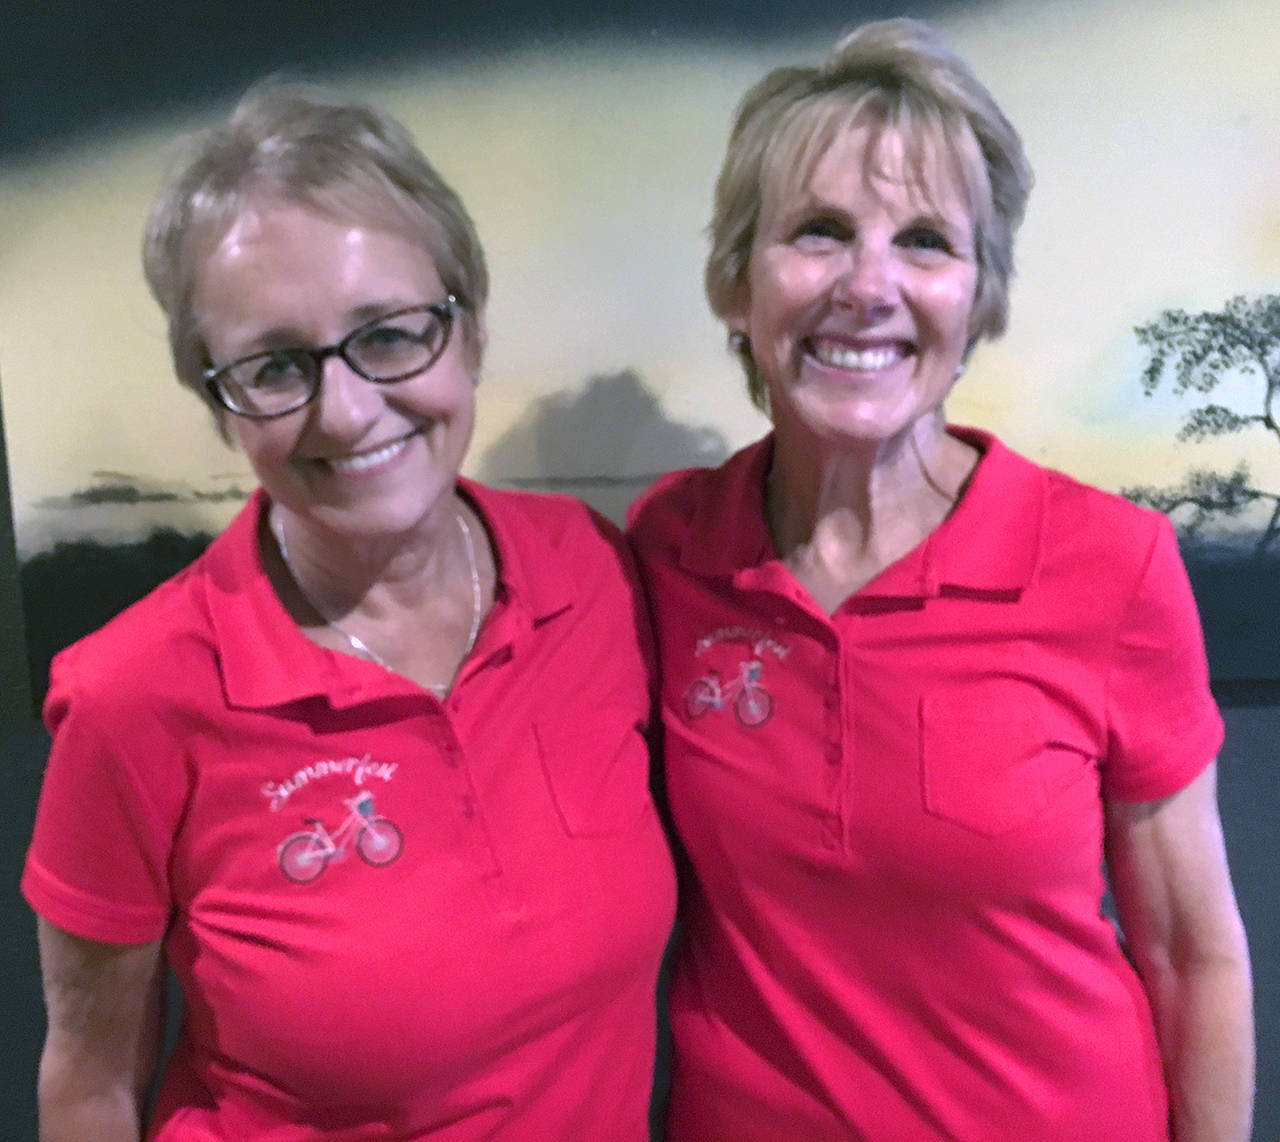 (Kat Bryant | The Daily World) Bobbi McCracken, left, and Bette Worth, board members of the Aberdeen Revitalization Movement, have put together Summerfest, which they hope will become an annual community event.